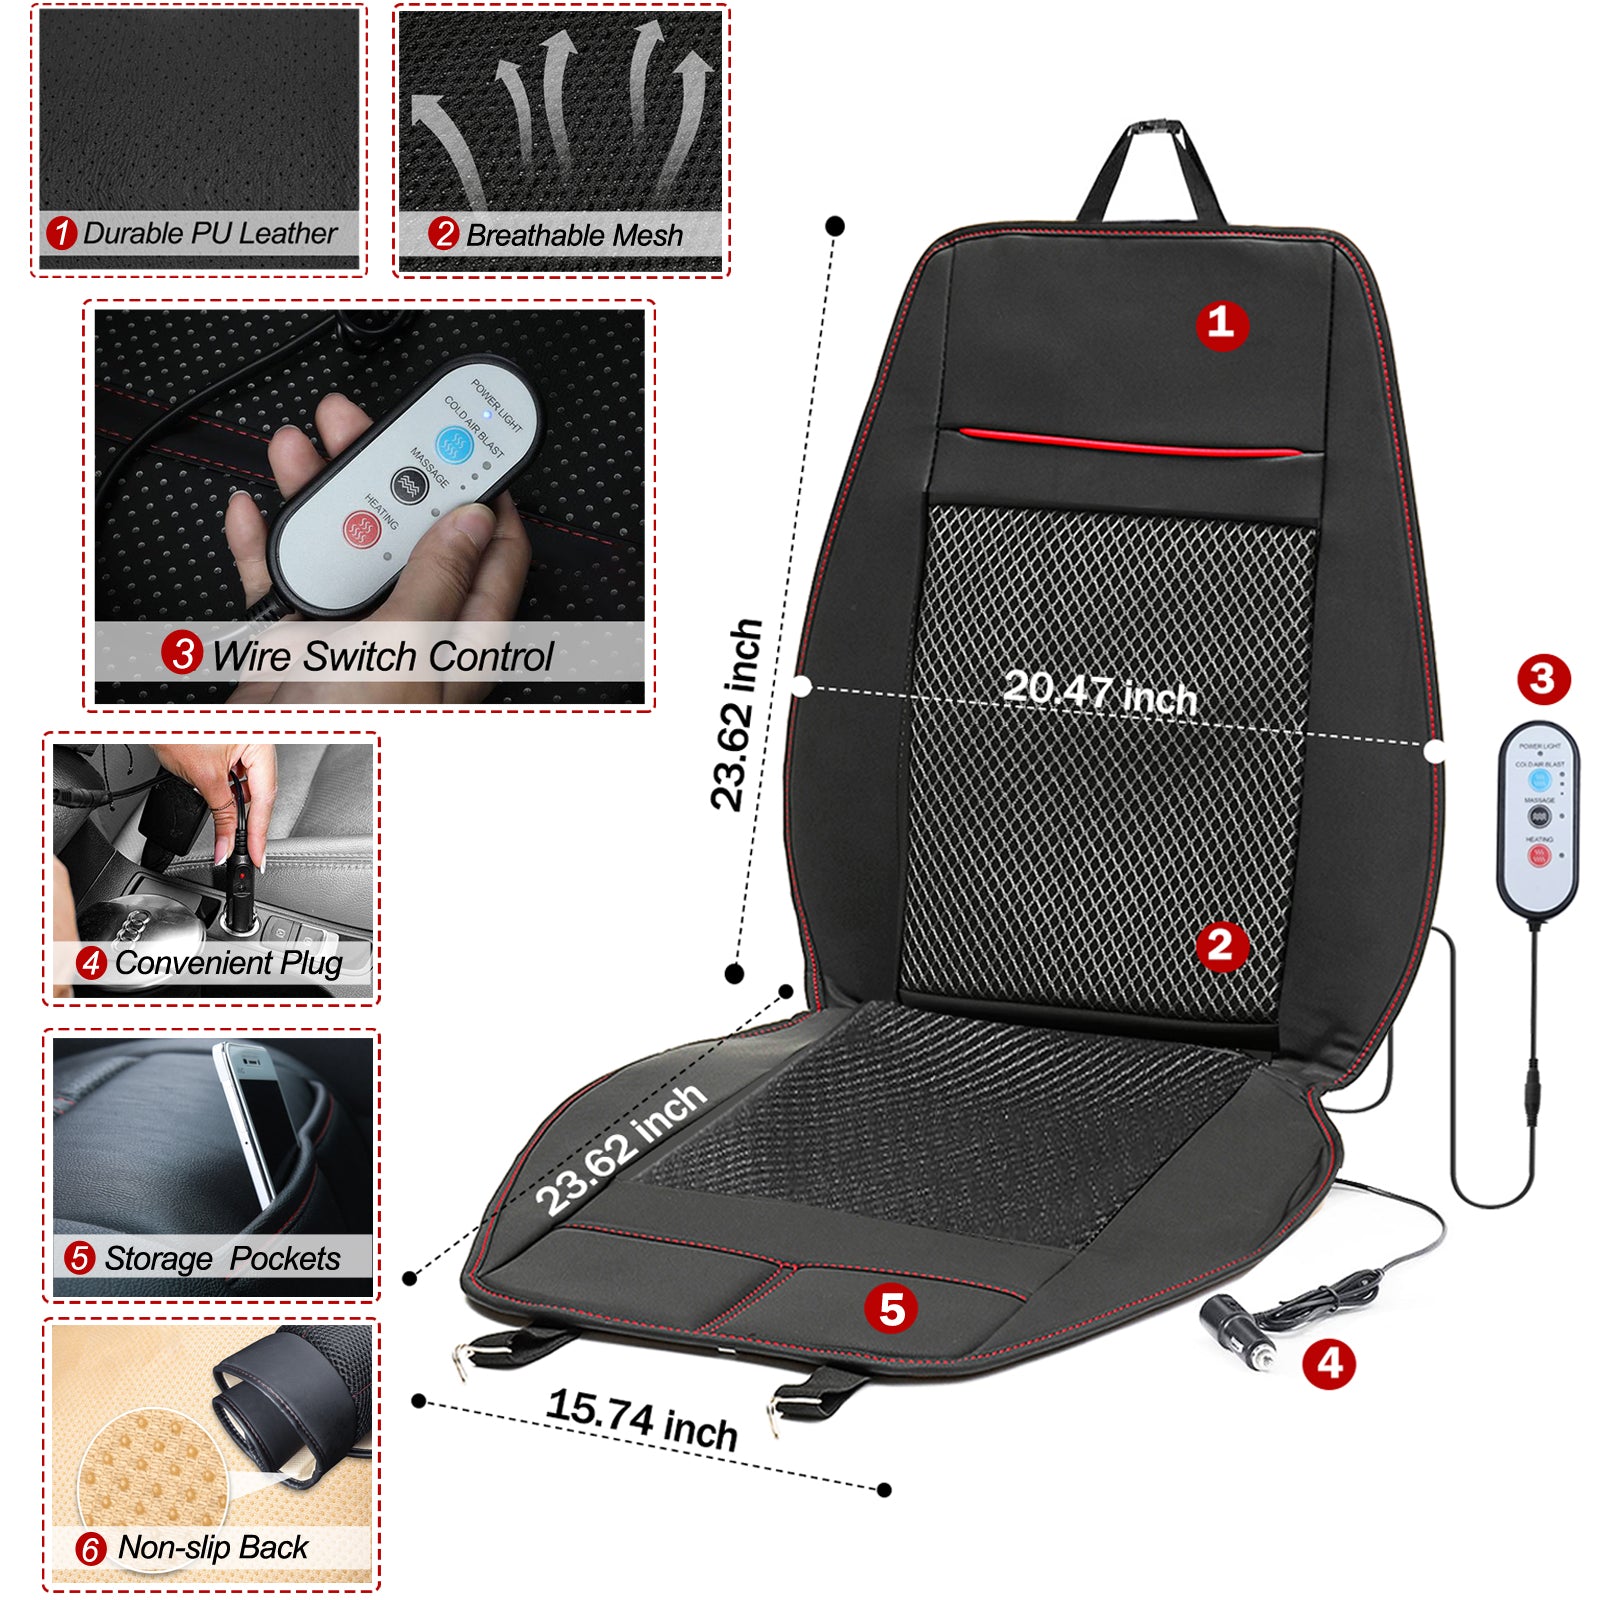 3 In1 Massage Car Seat Cover Cushion Cooling Warm Heated Chair